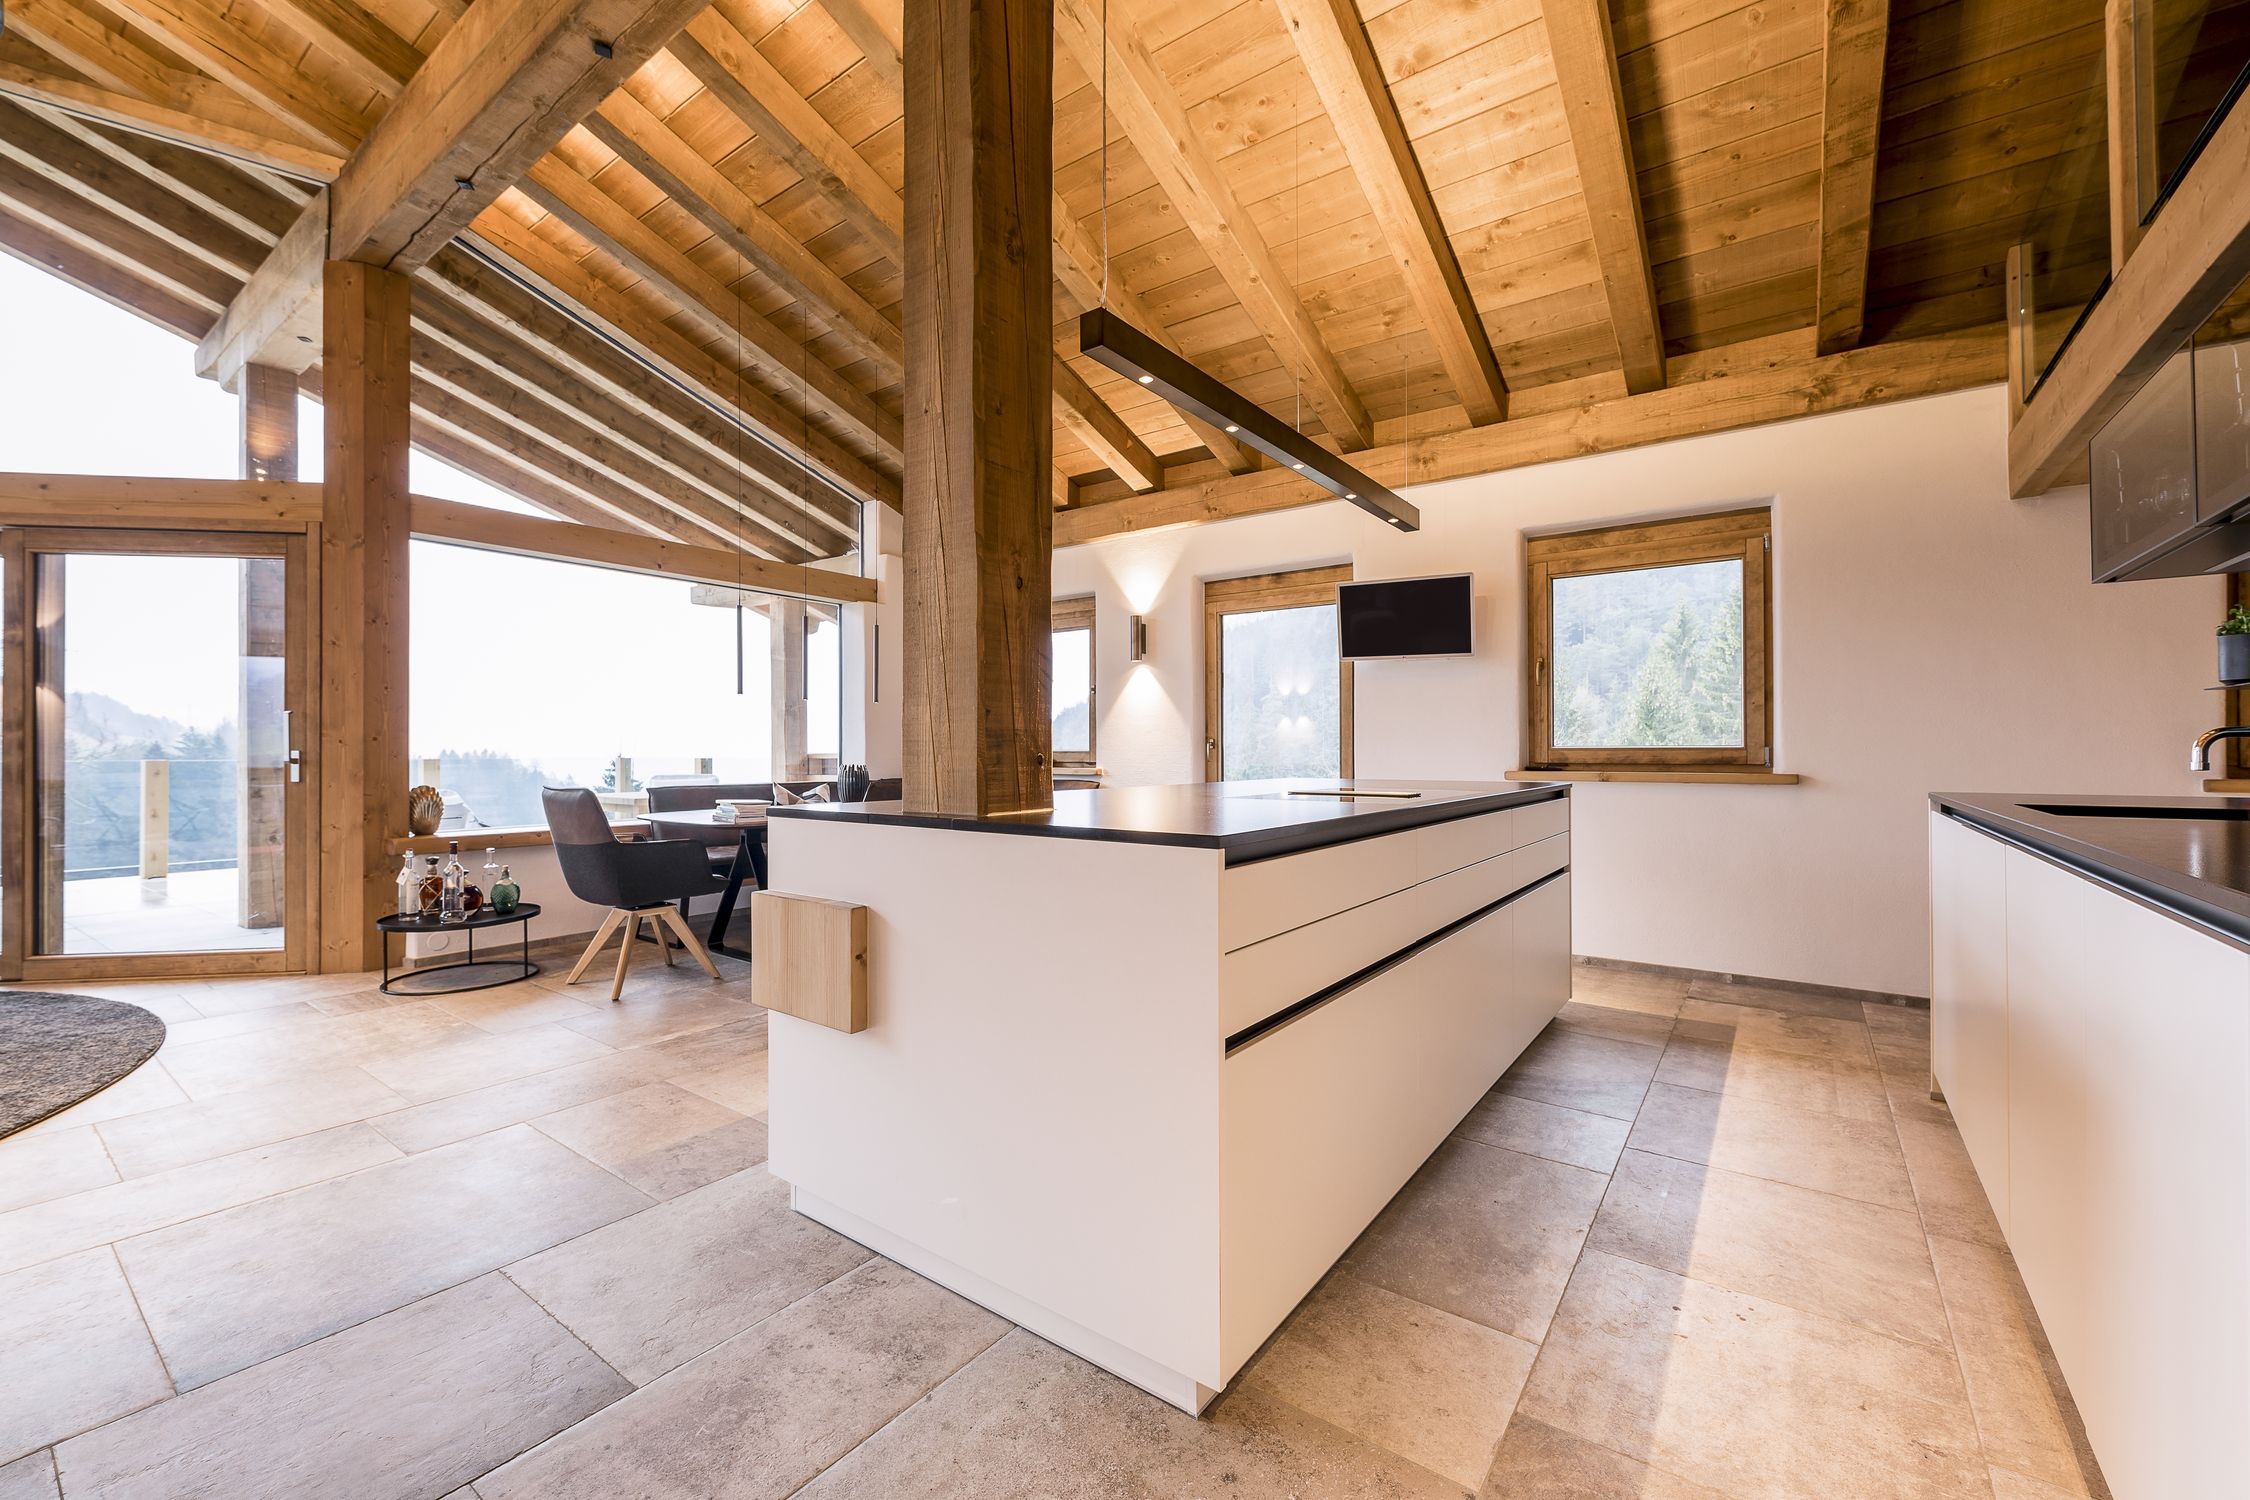 Private Residence, Seefeld, Austria | PROLICHT Projects